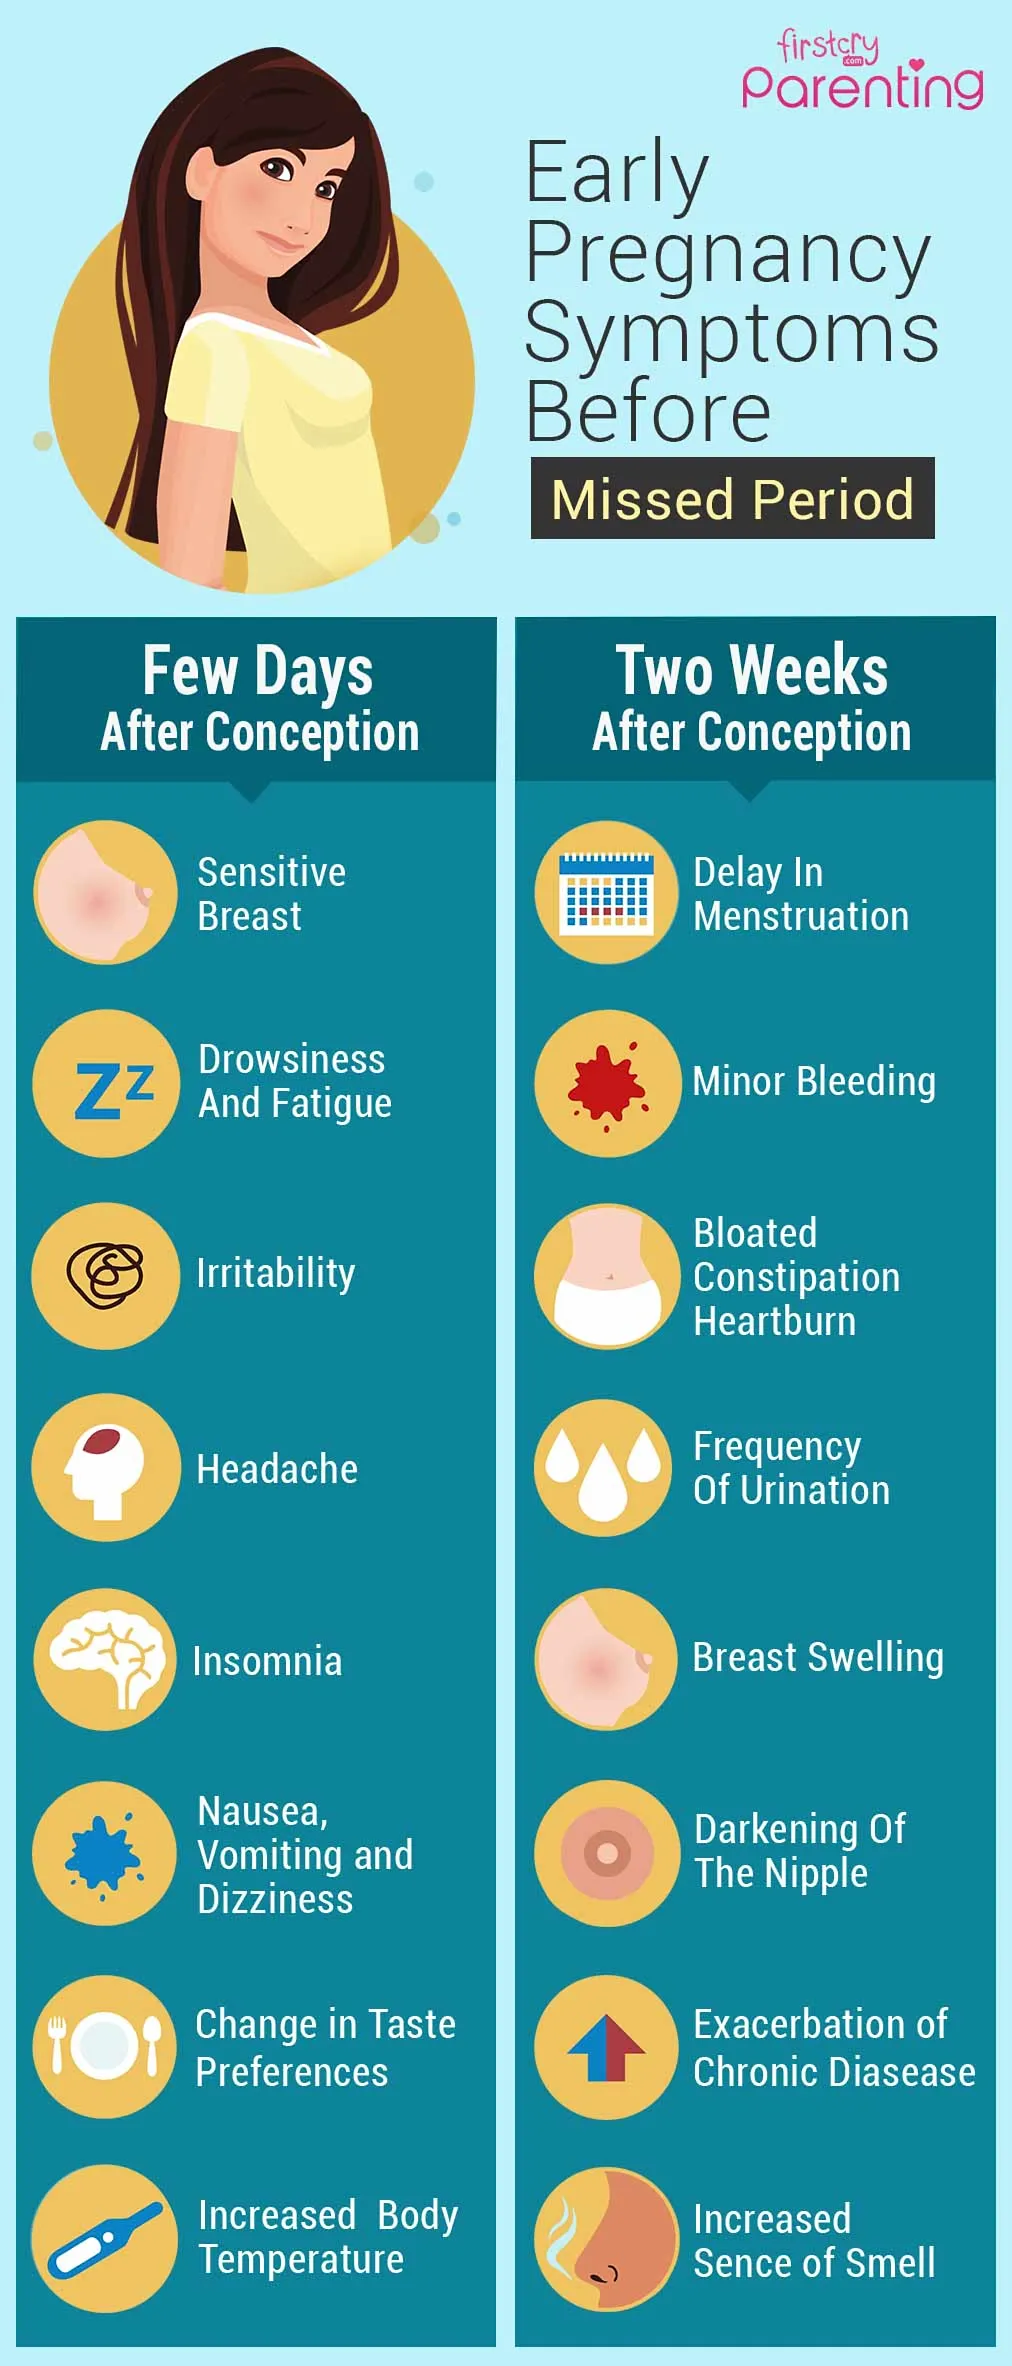 Early Pregnancy Symptoms Before a Missed Period